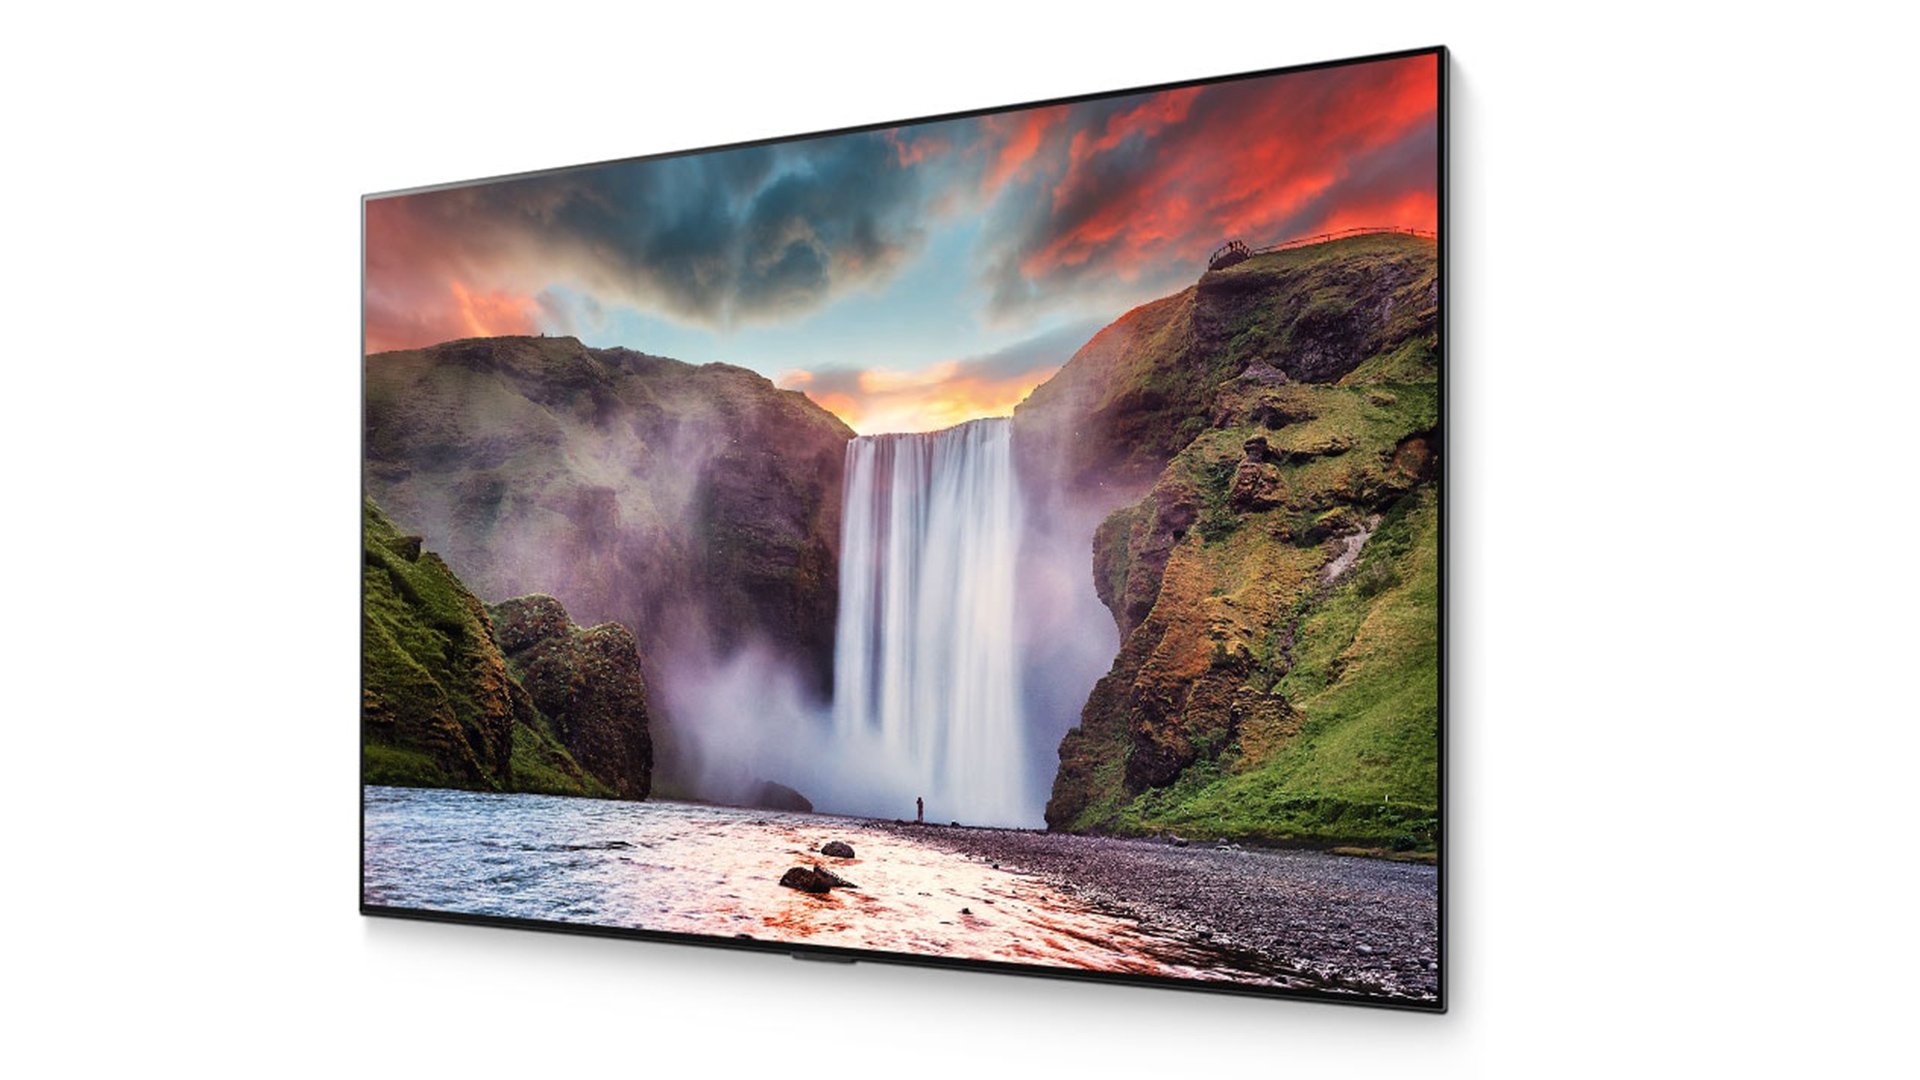 Modern televisions don't always show what the director intended. Image: LG.